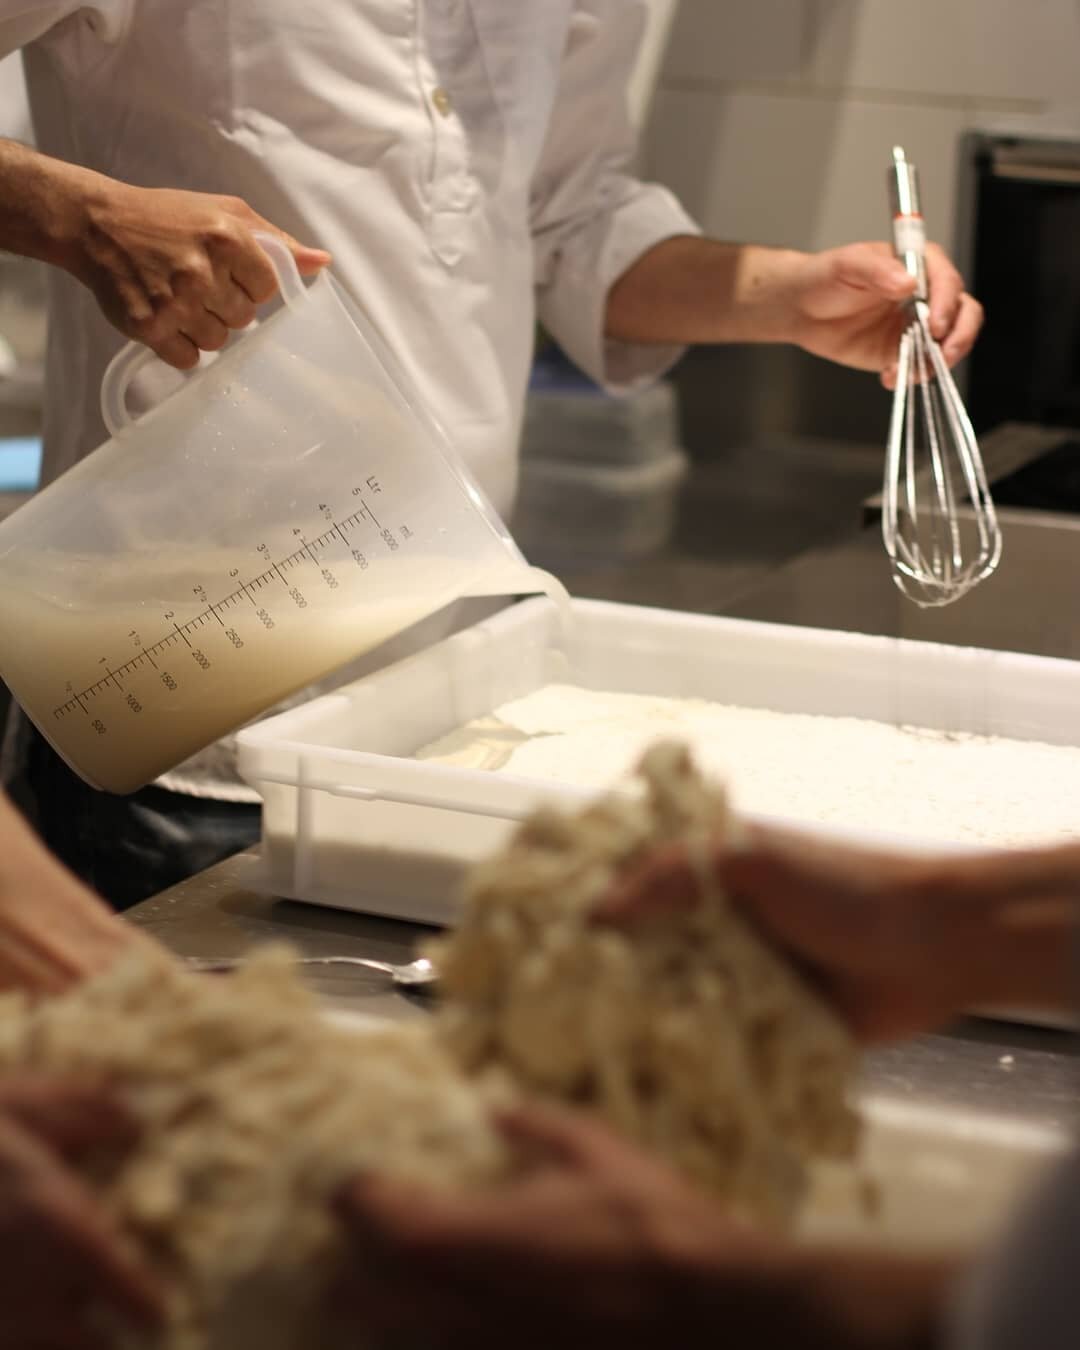 We make our own fresh dough every day, to create the crunchiest yet airy pizza crust. All pizzas are handmade daily and carefully selected ingredients come straight from passionate artisans ❤️